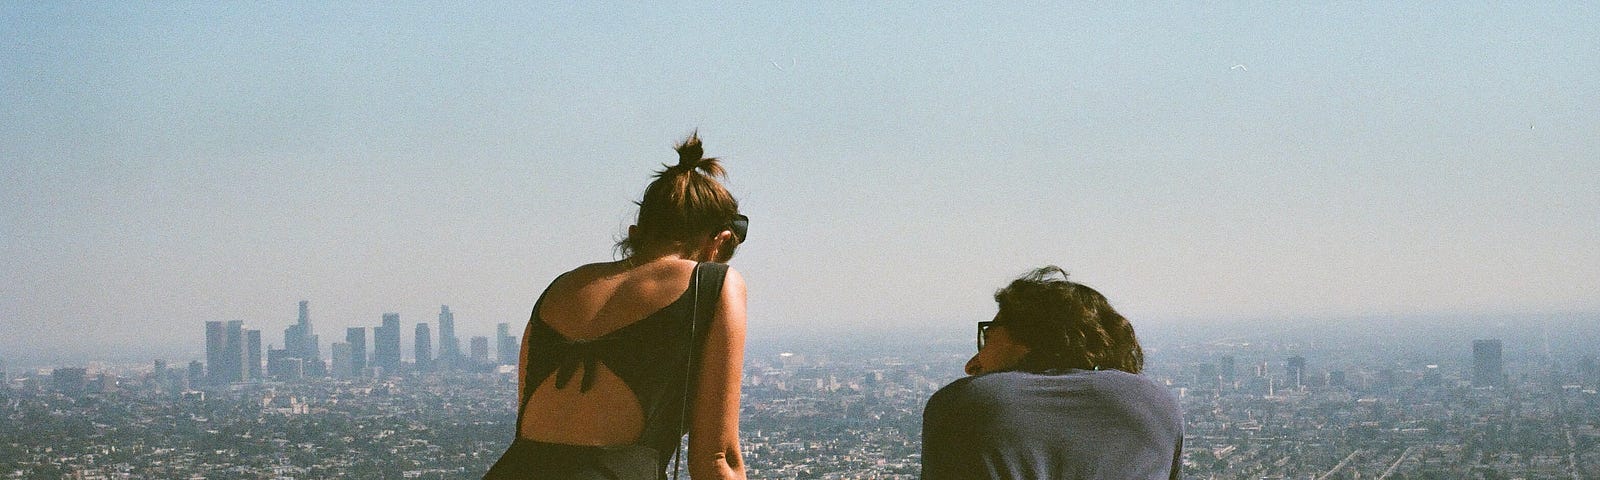 Woman and male on a platform or hill overlooking a city skyline in summer.